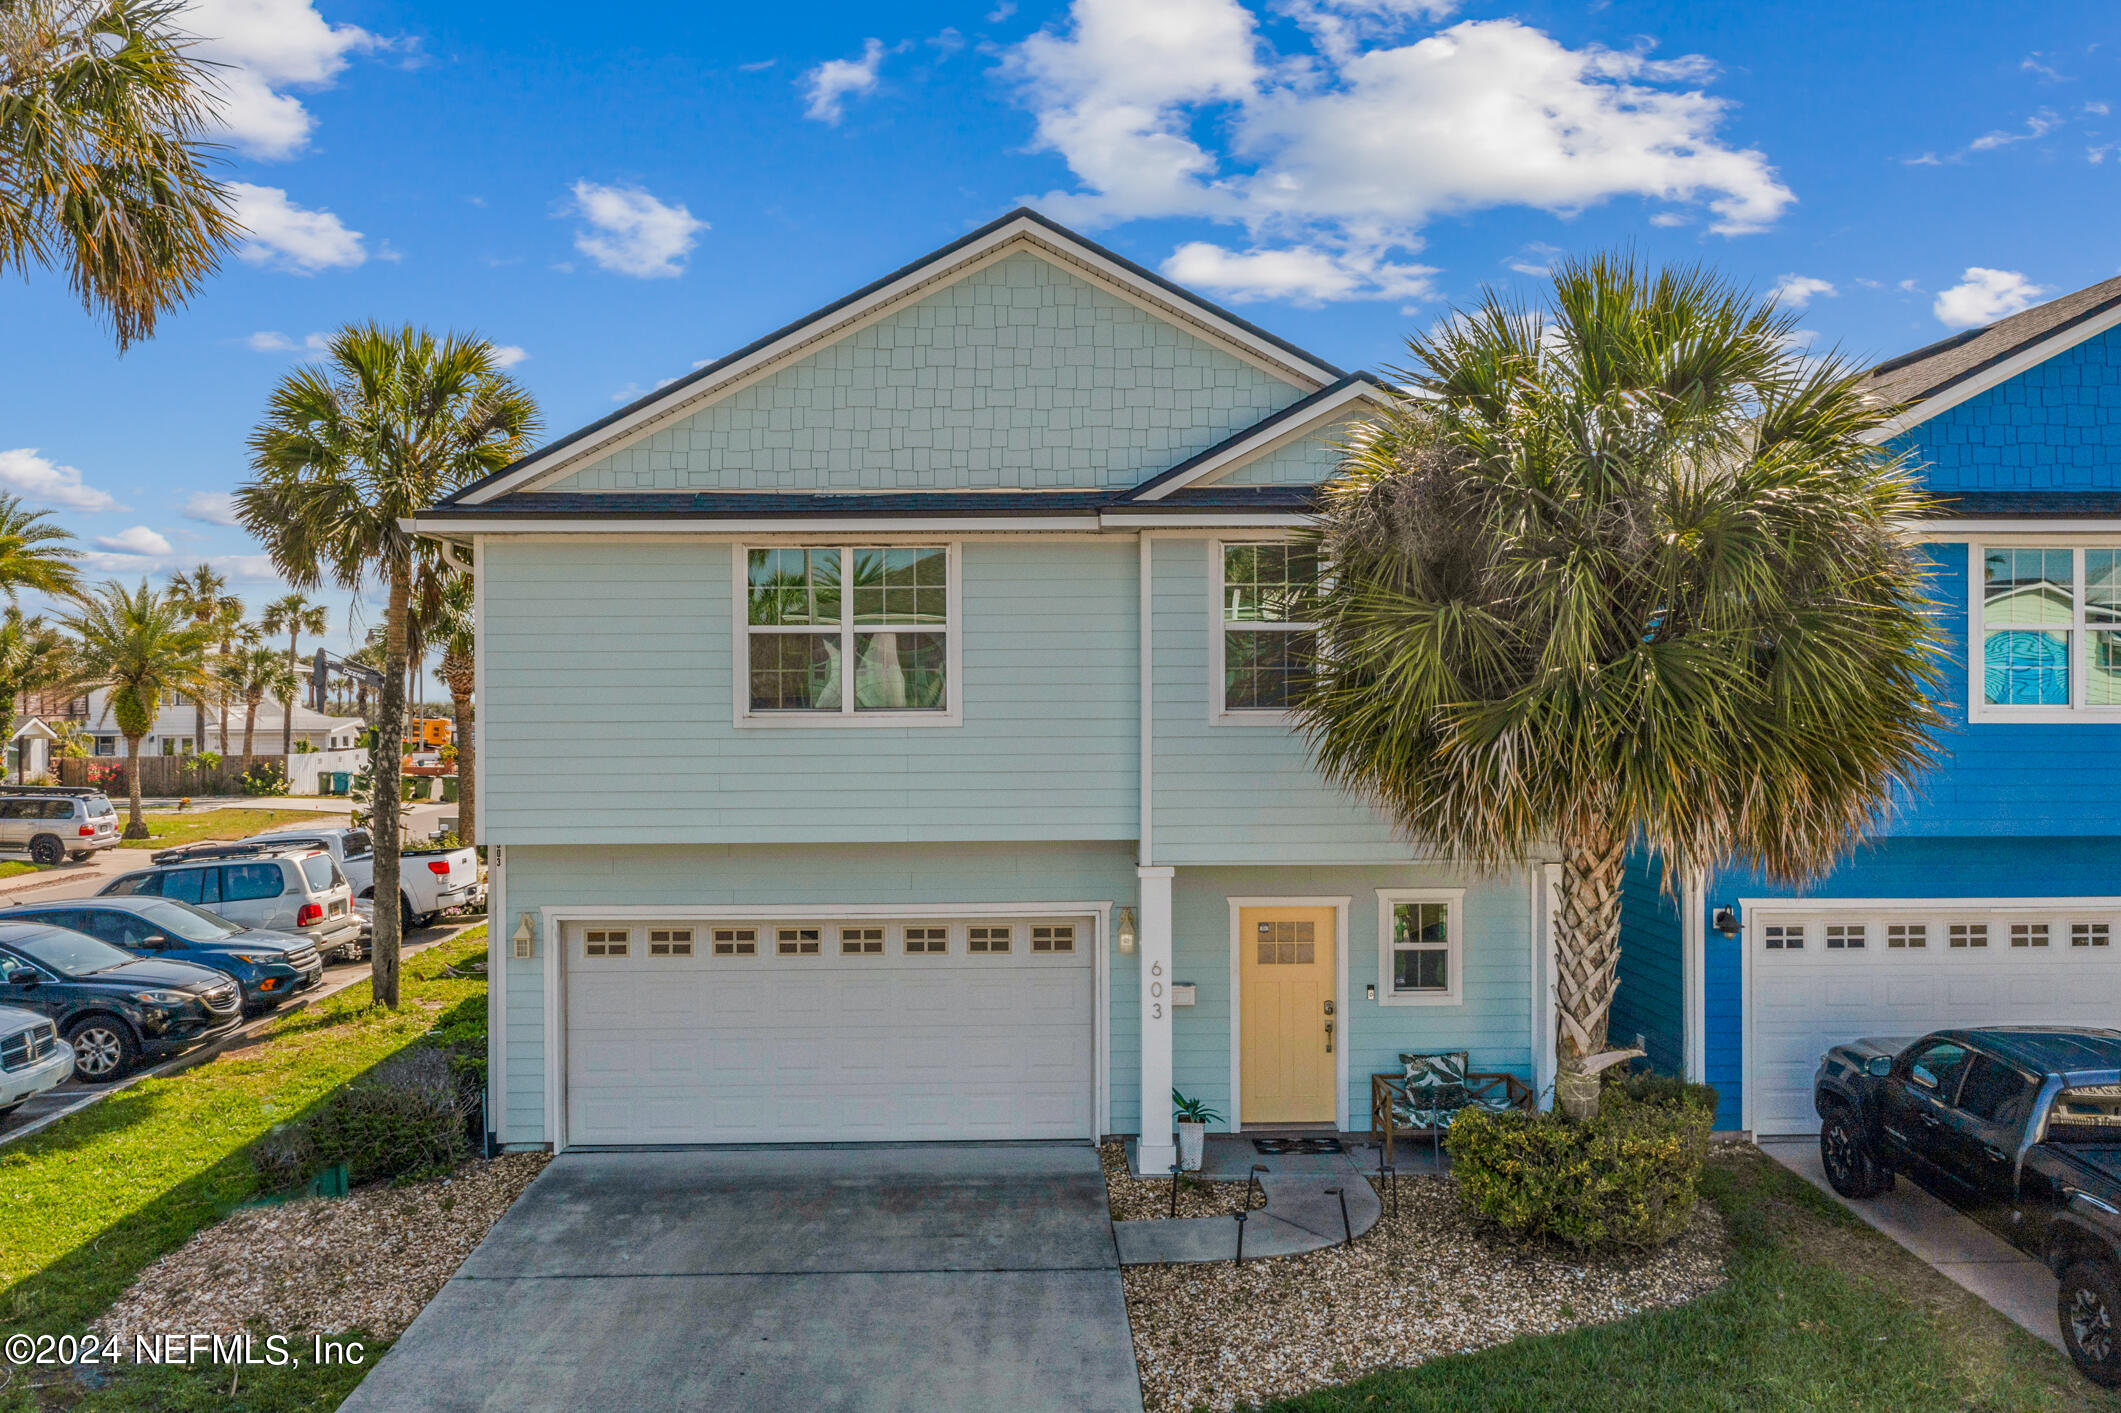 Jacksonville Beach, FL home for sale located at 603 2nd Street S, Jacksonville Beach, FL 32250